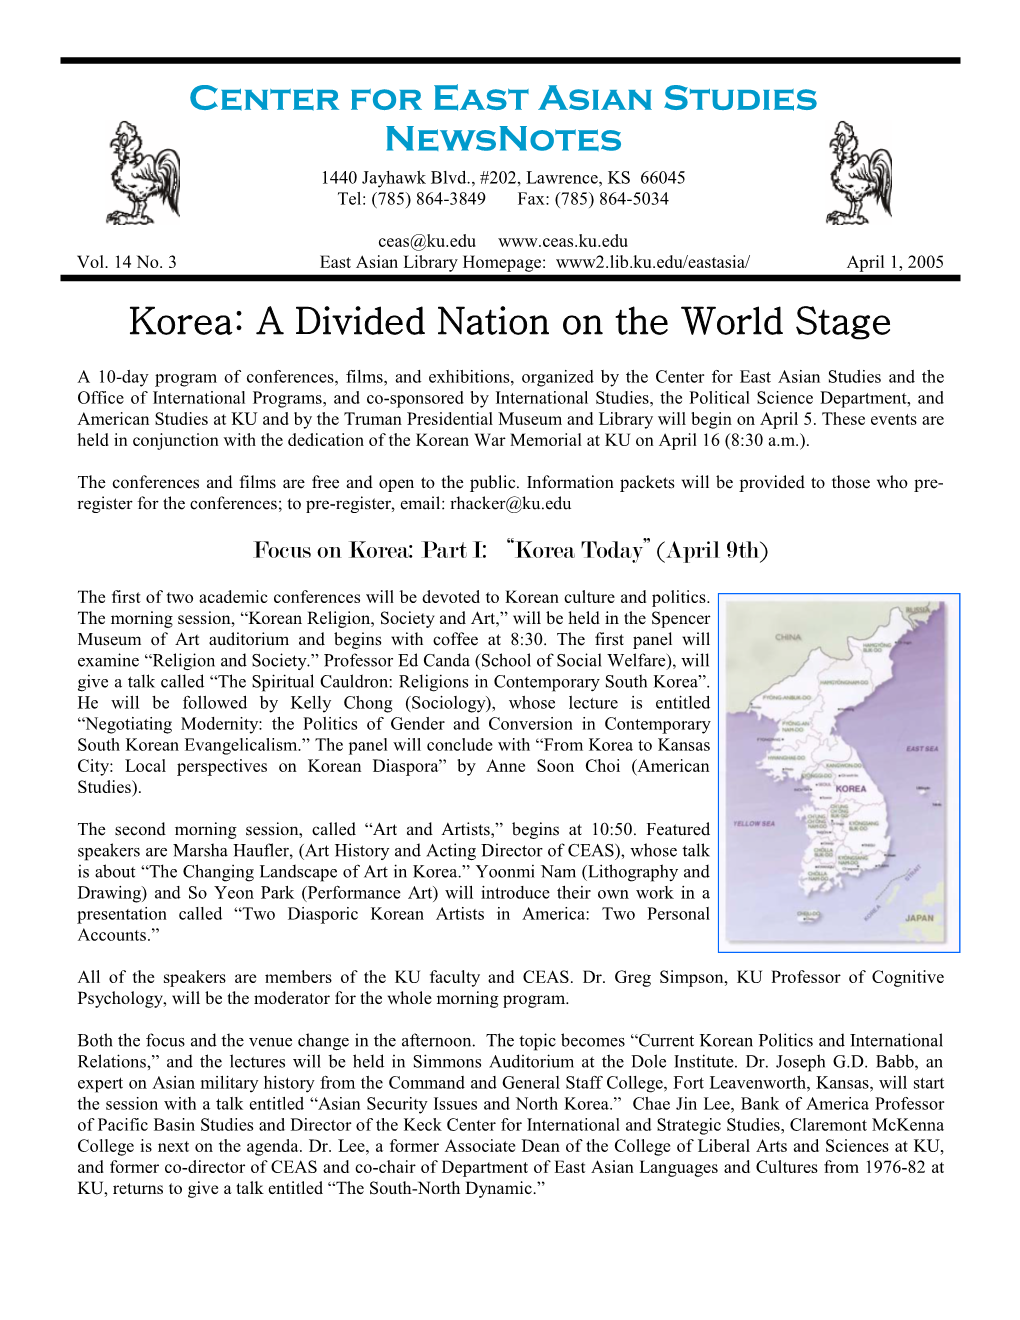 Center for East Asian Studies Newsnotes Korea: a Divided